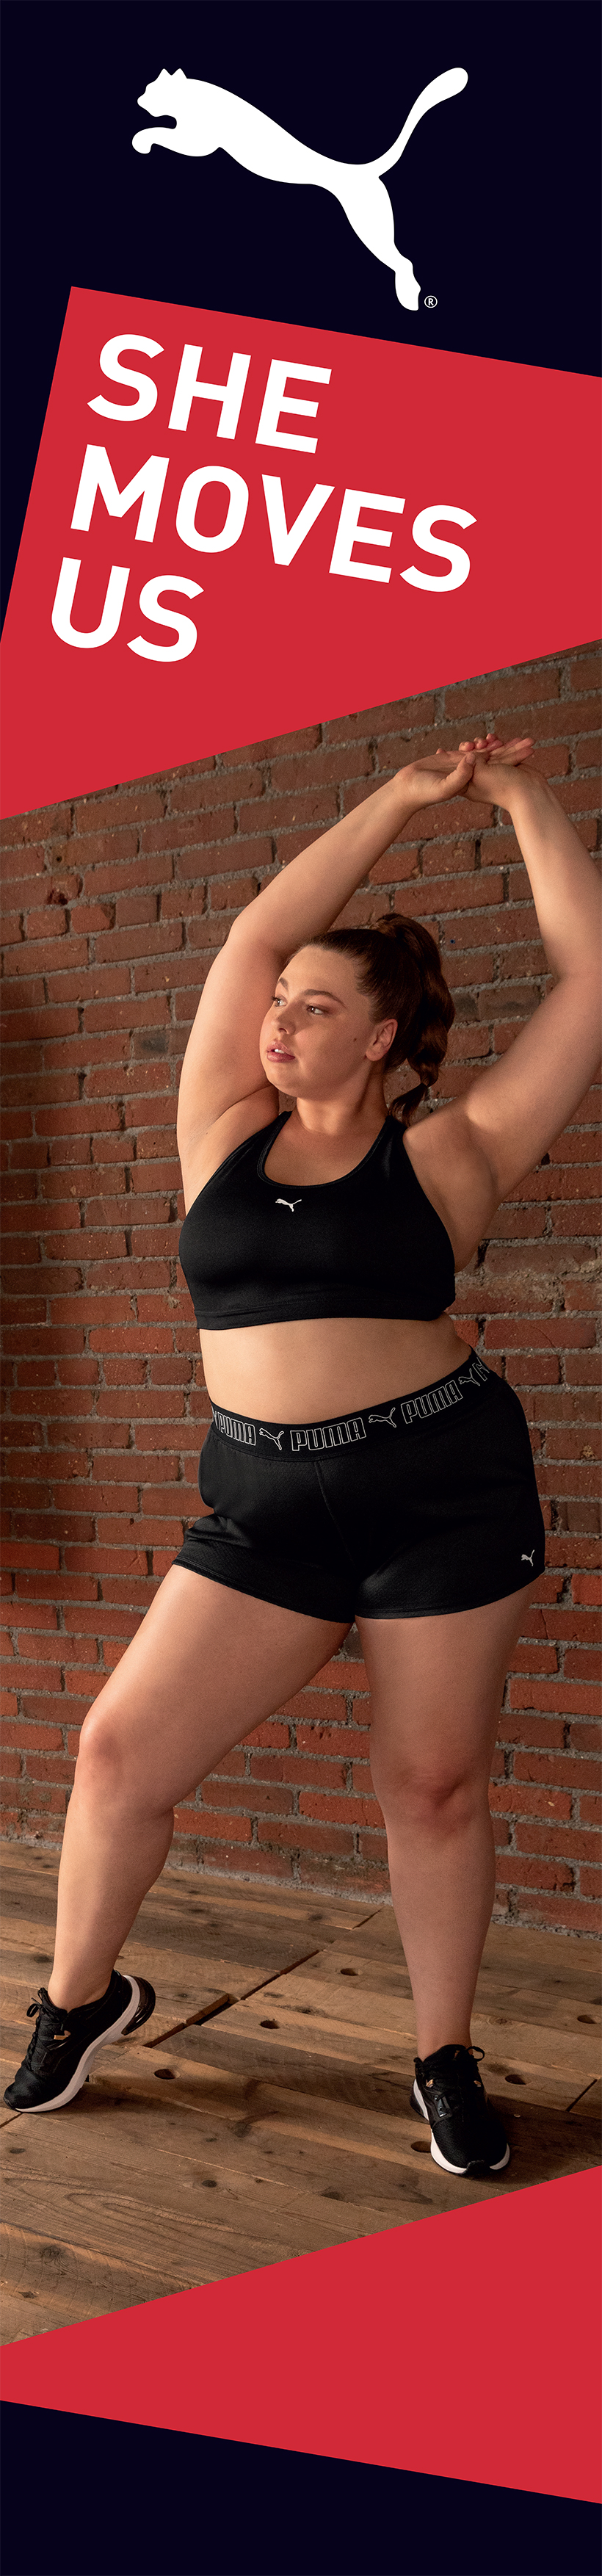 21AW_In-Store_RT_Training_Plus-Size_Backwall-Vertical_615x2880mm_Model-1_01_2212